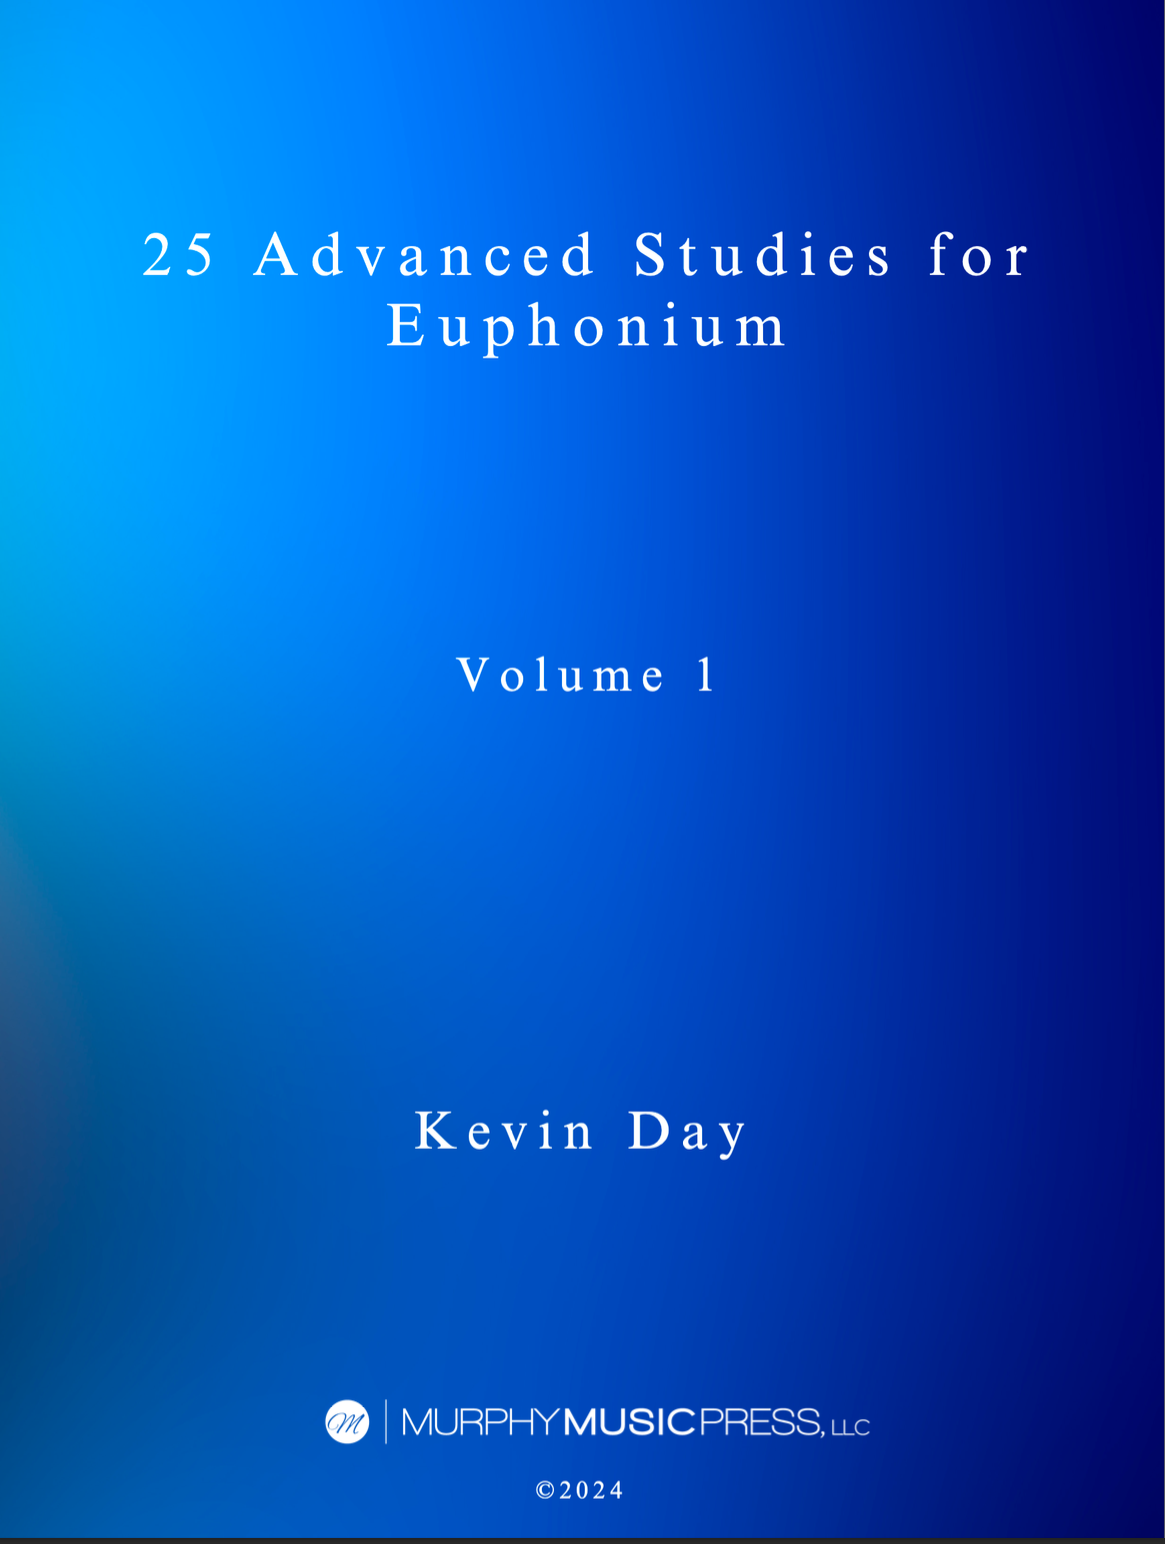 25 Advanced Studies For Euphonium by Kevin Day